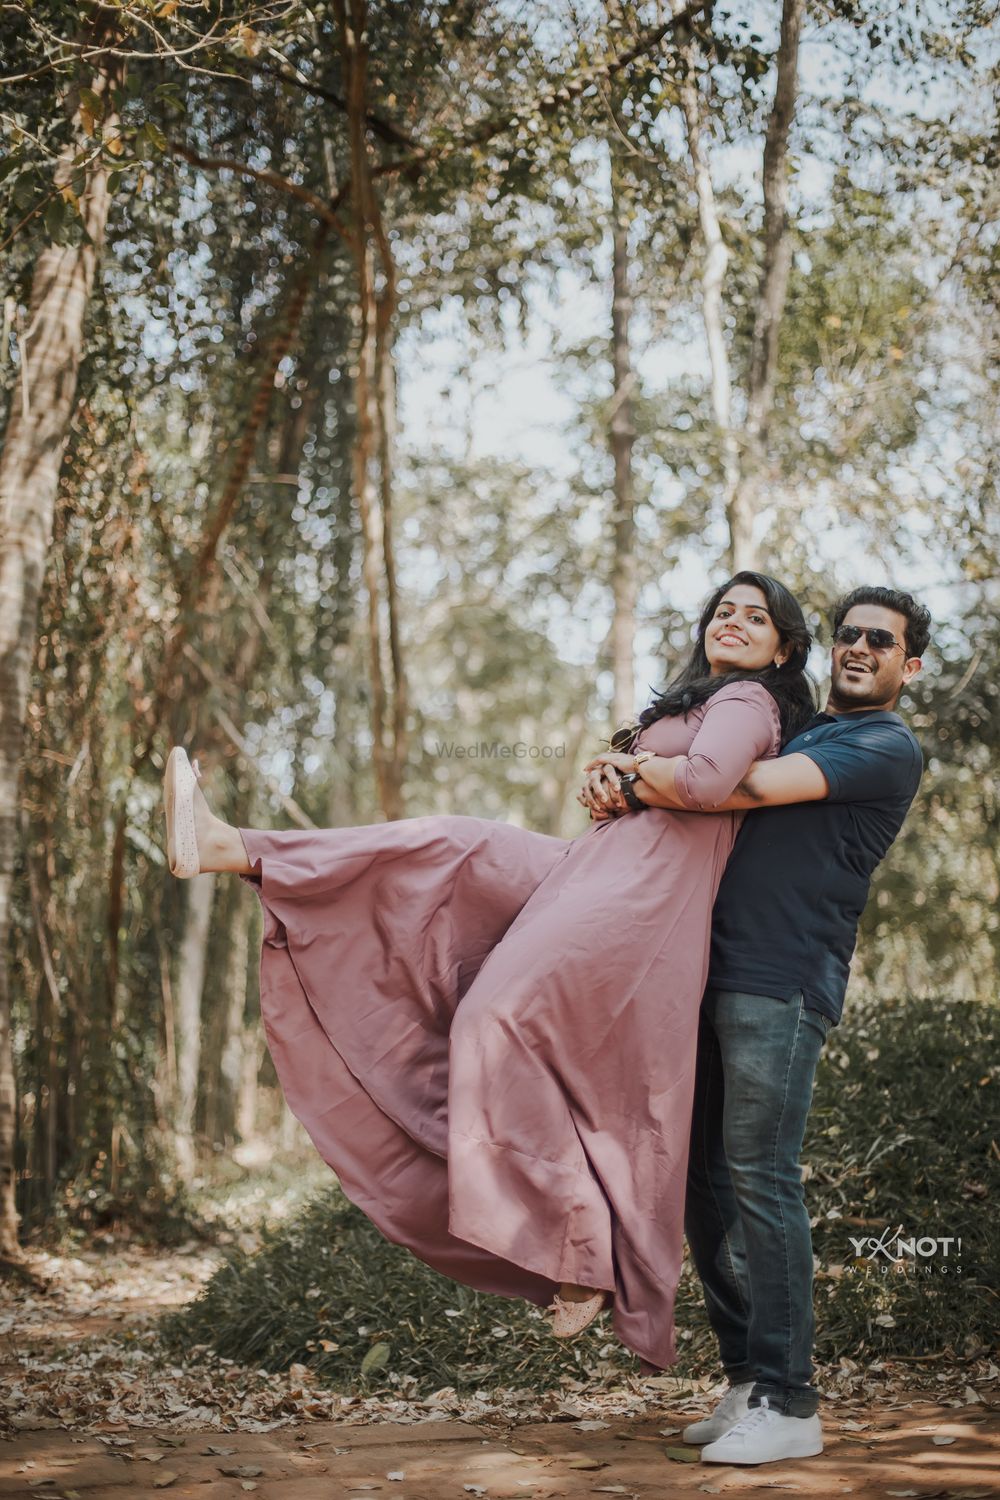 Photo From Pre Wedding of Rose & Raphael - By YKNOT Weddings